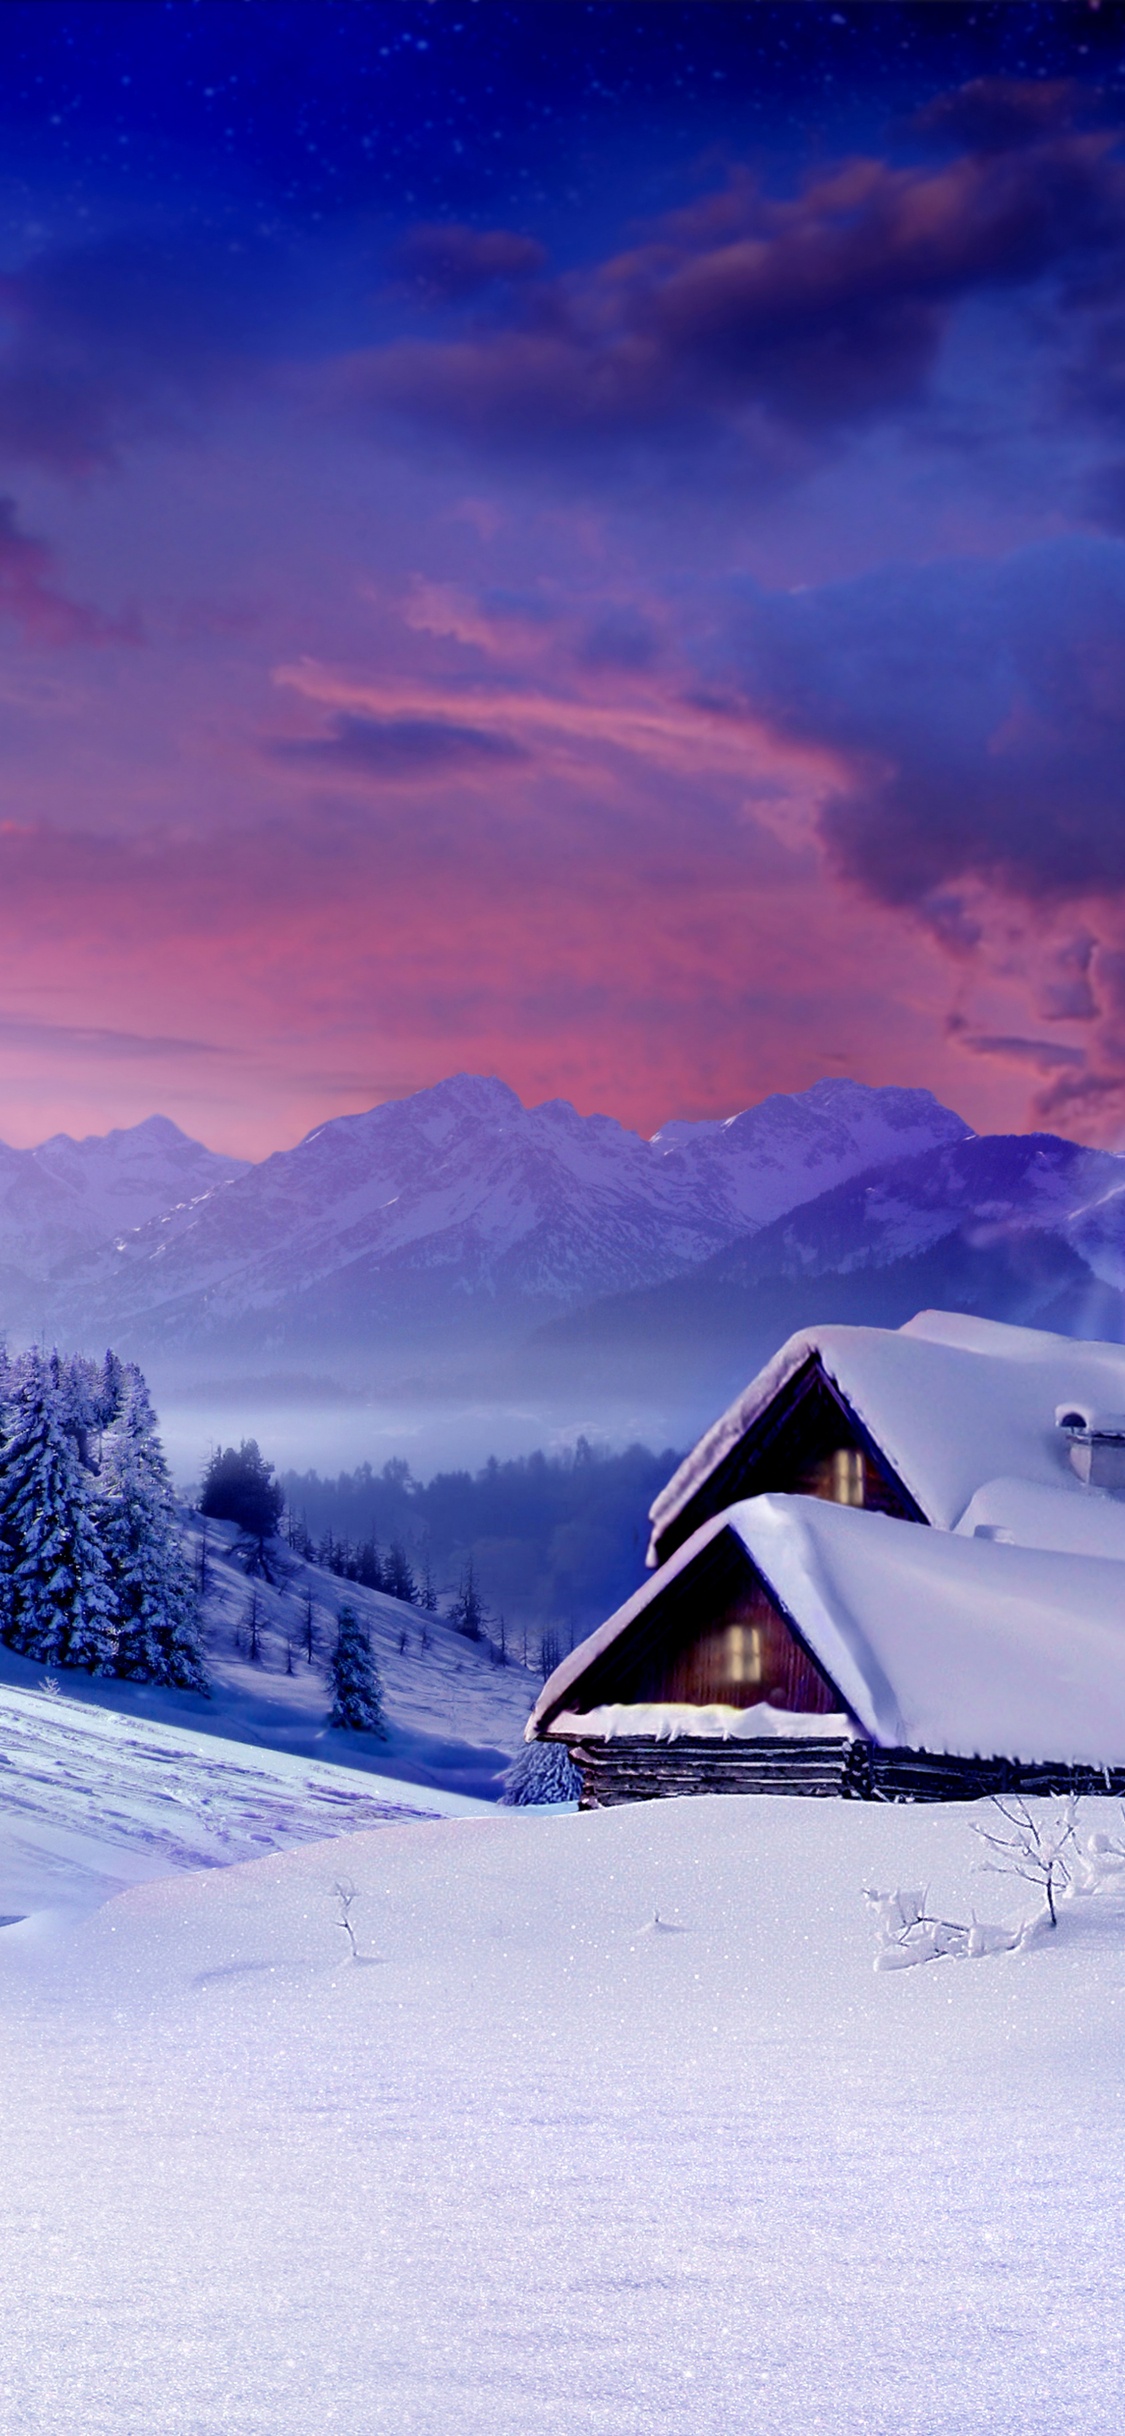 Brown Wooden House on Snow Covered Ground Near Trees and Mountains During Daytime. Wallpaper in 1125x2436 Resolution